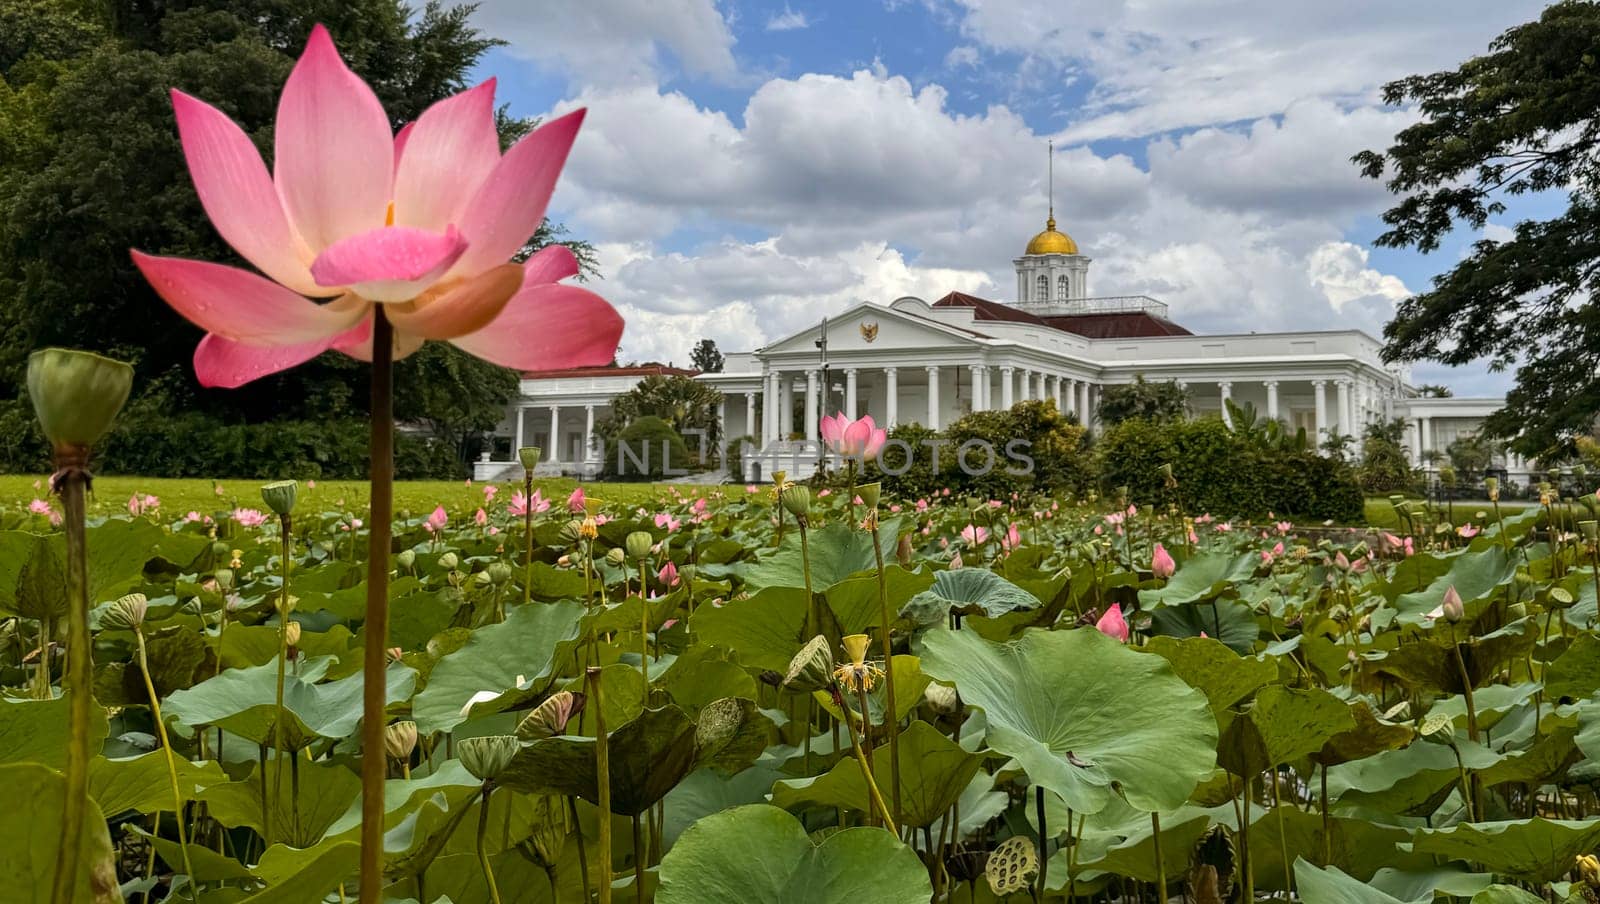 Bogor, West Java, Indonesia, 21 April 2024, Bogor presidential palace, also known as the Istana Bogor, is a historic palace located in the city of Bogor, West Java, Indonesia. The palace was built in the 18th century and served as the residence of the Dutch